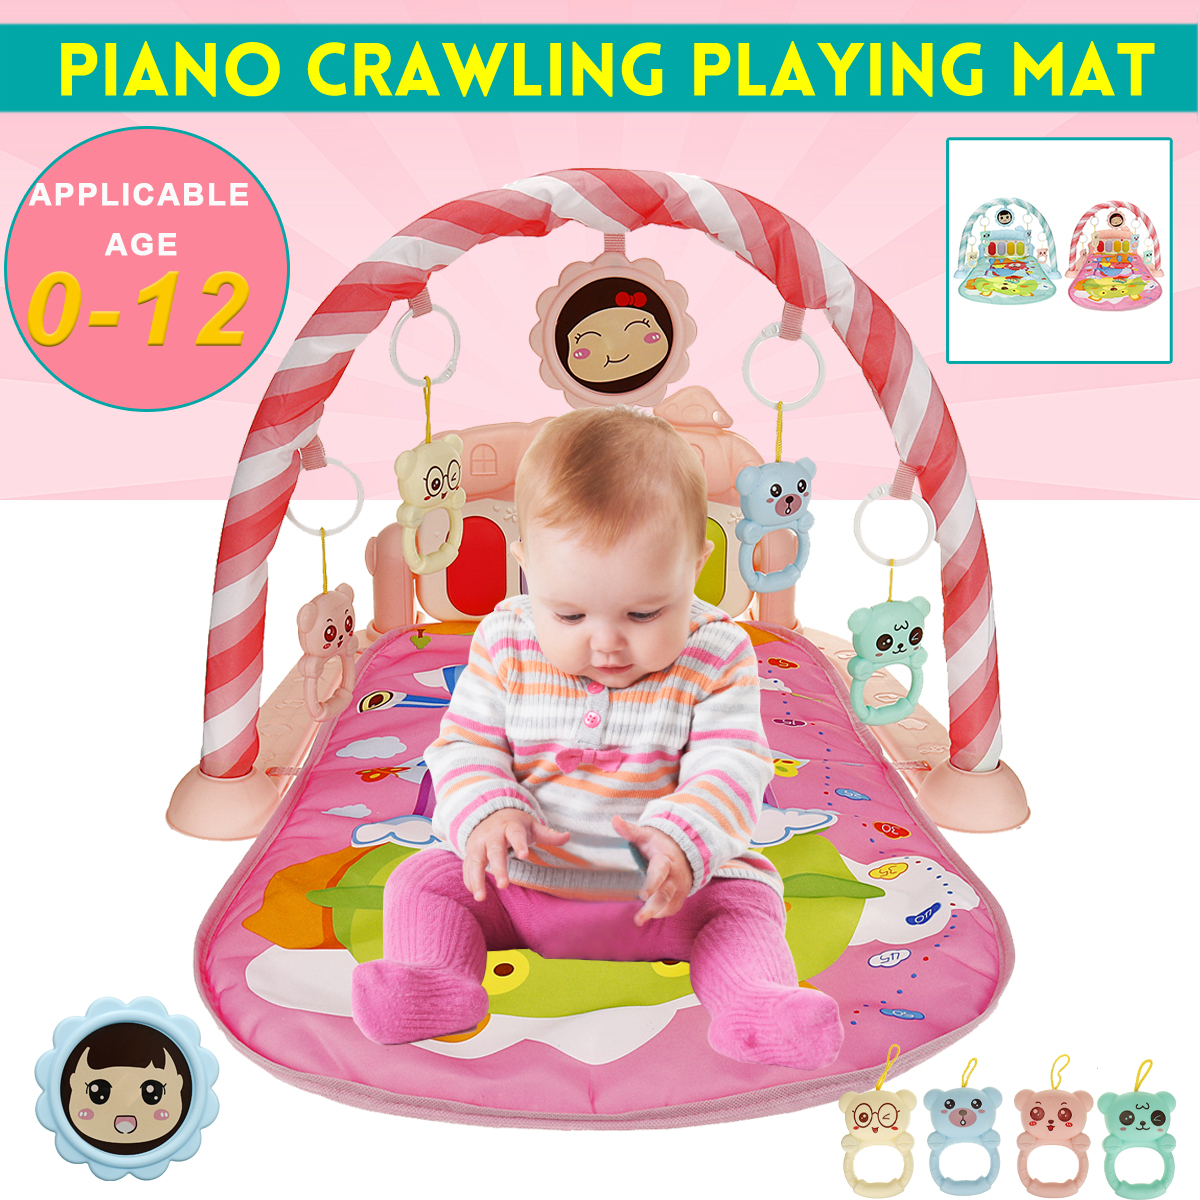 0-18-months-baby-music-fitness-frame-shell-baby-music-pedal-pedal-piano-childrens-foreign-trade-toys-1958601-1